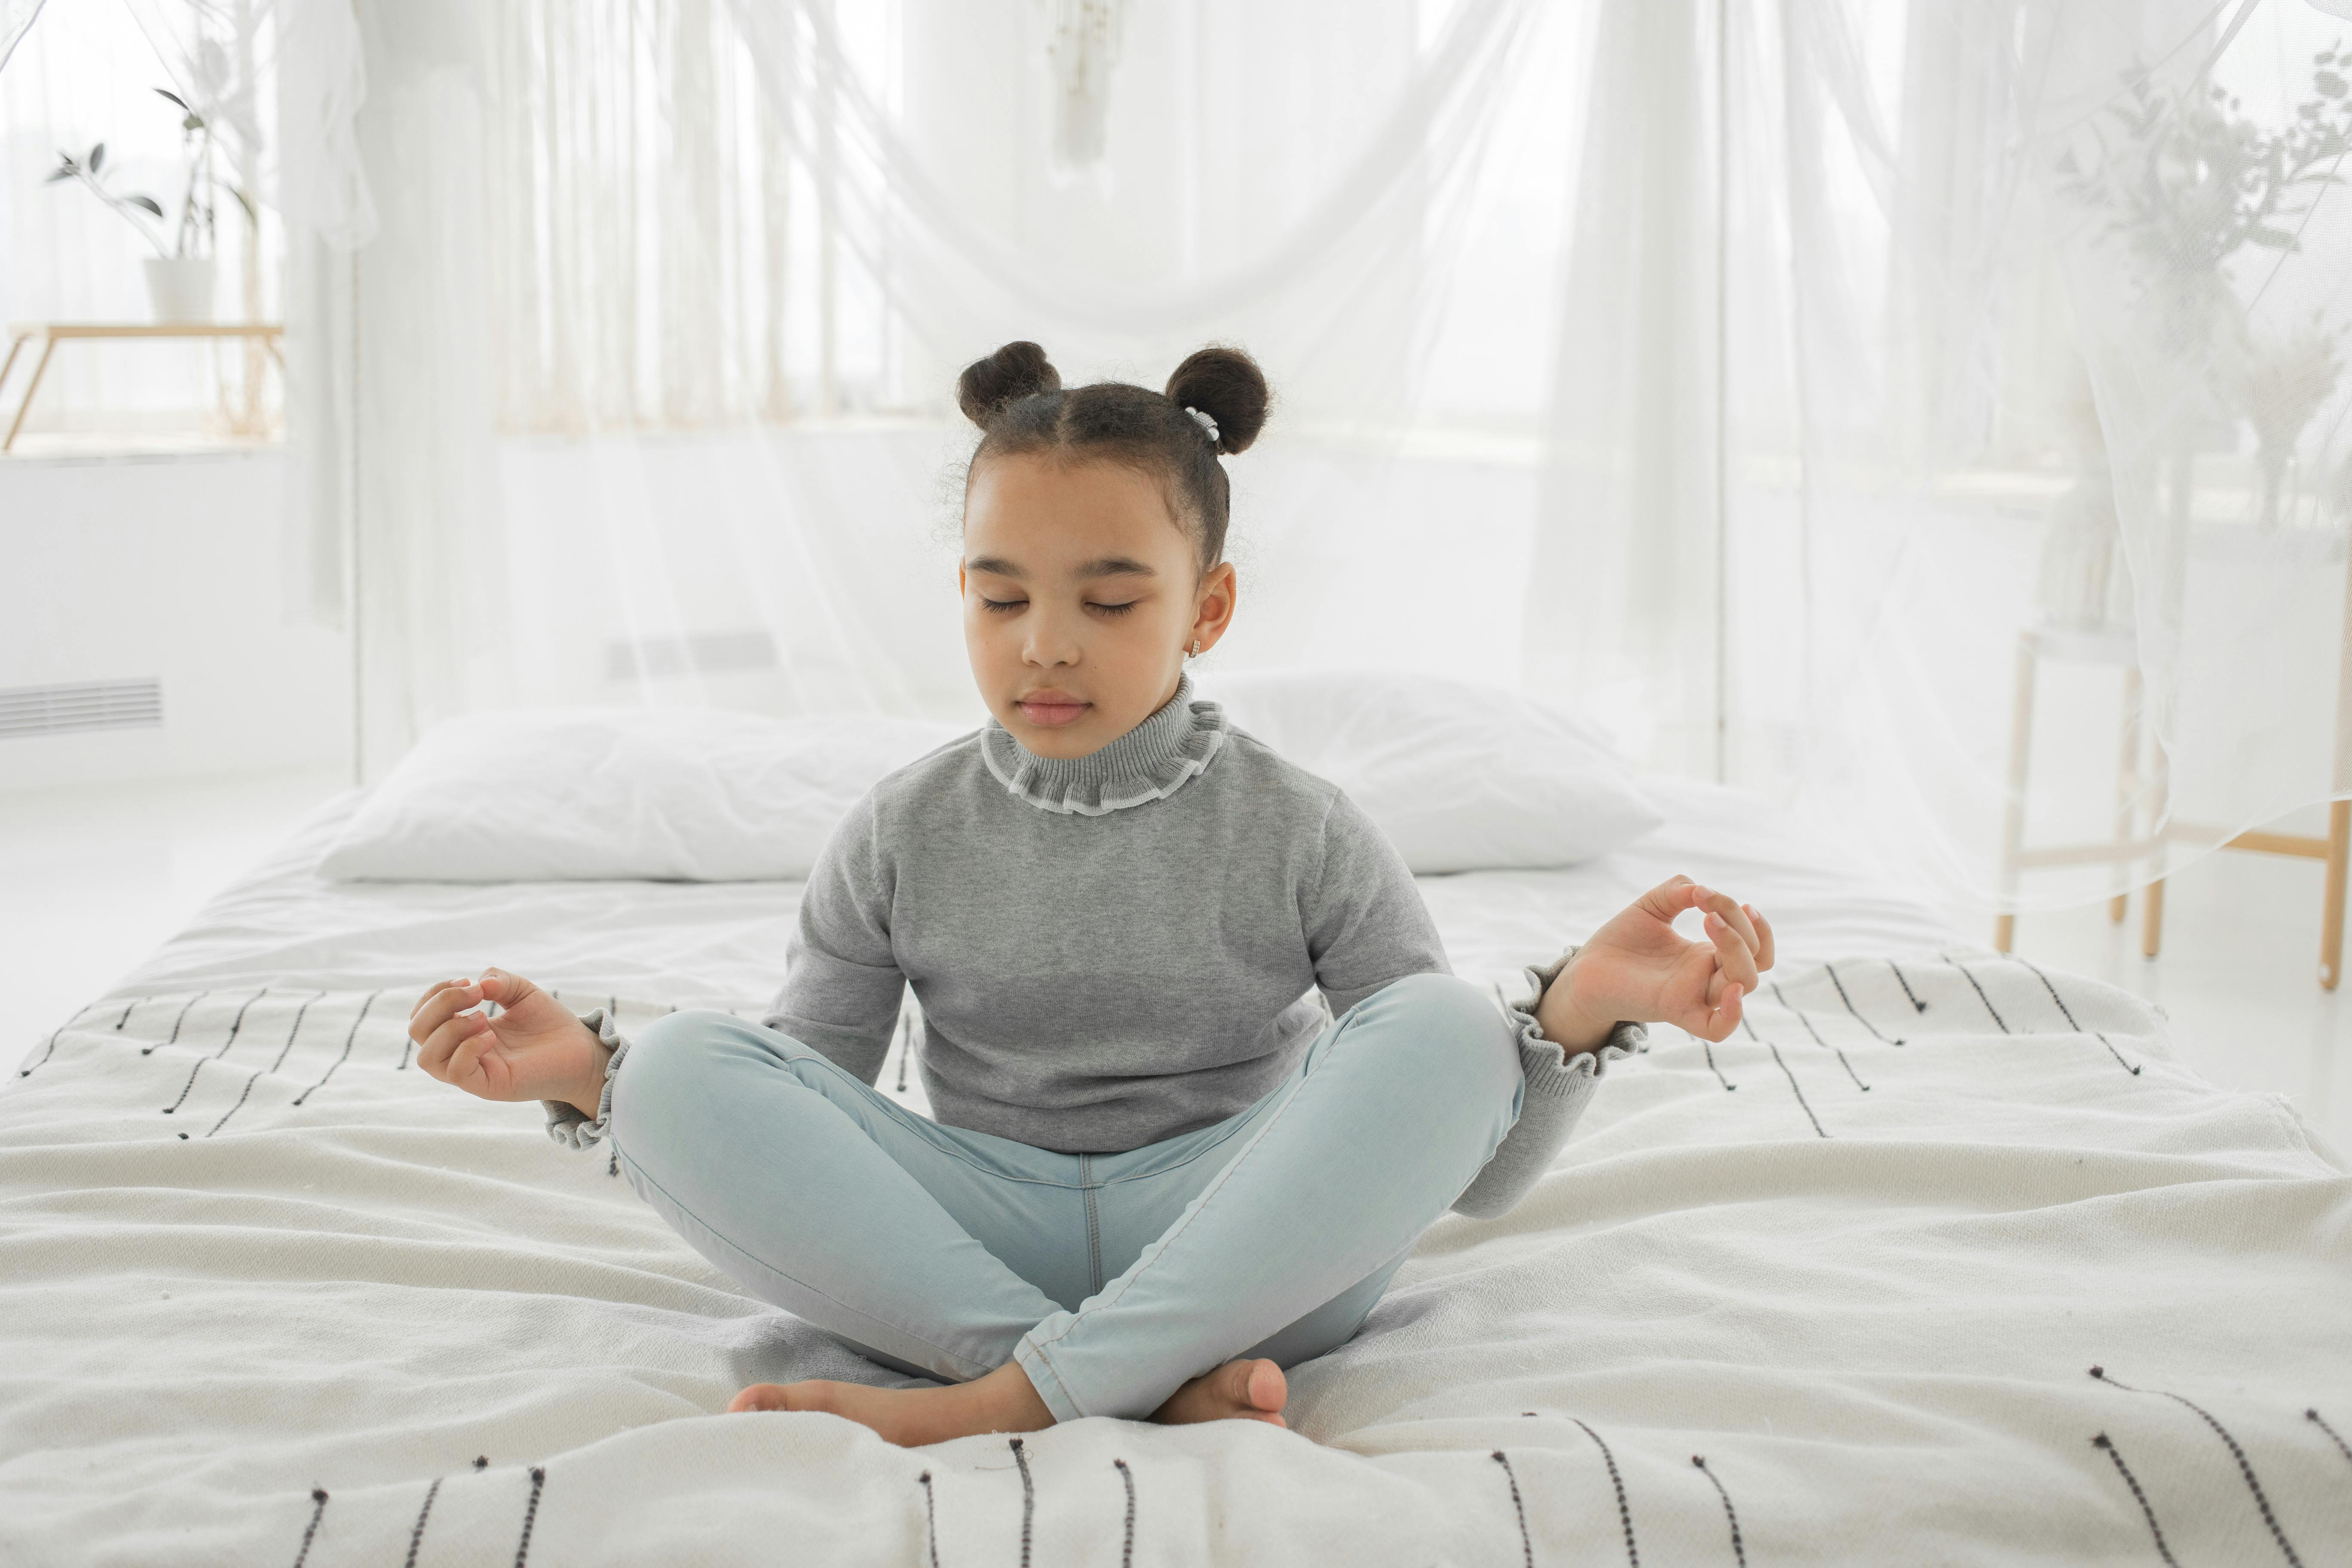 calm black kid meditating with closed eyes and mudra hands on bed